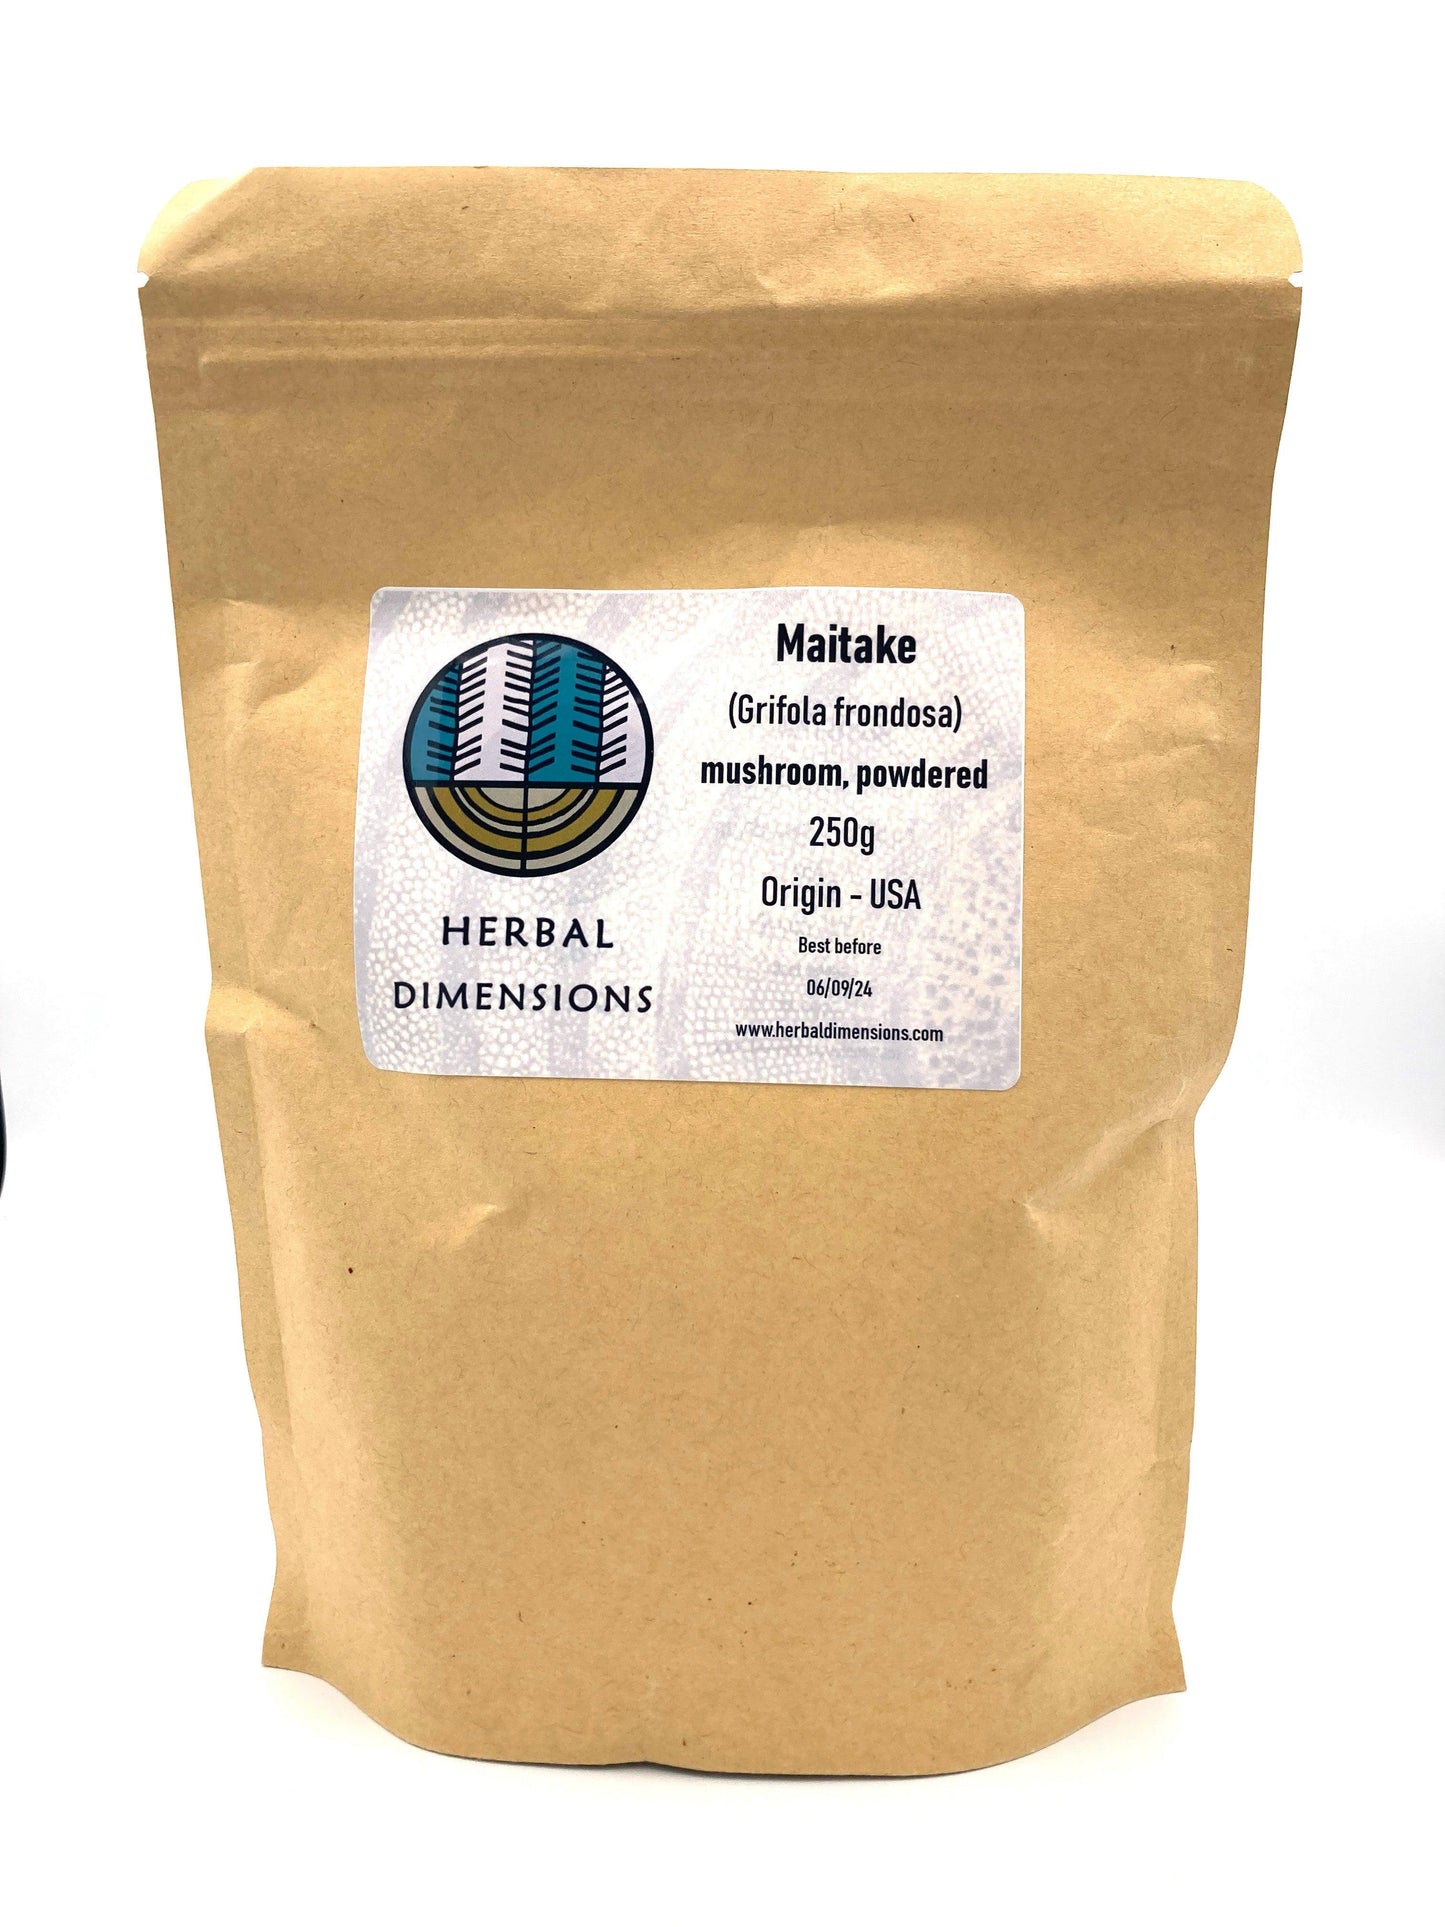 Maitake mushroom powder in recyclable pouches